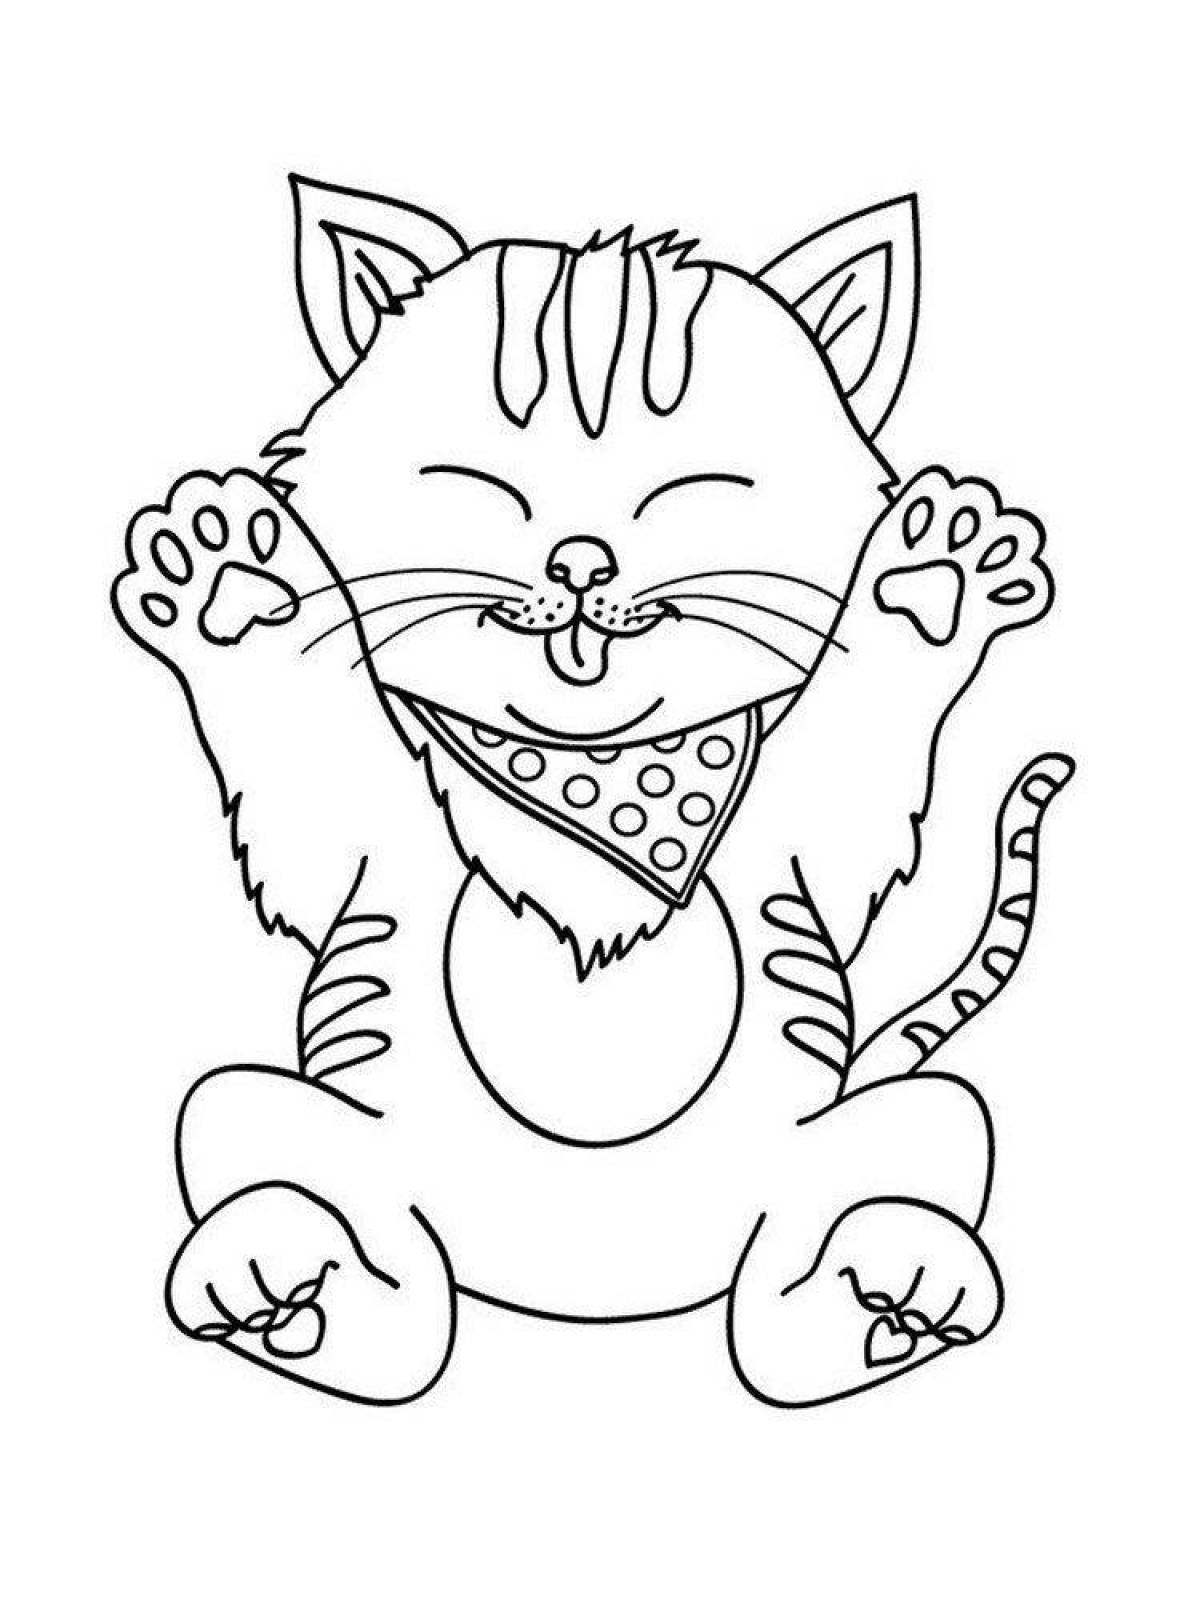 Adorable coloring book for cats